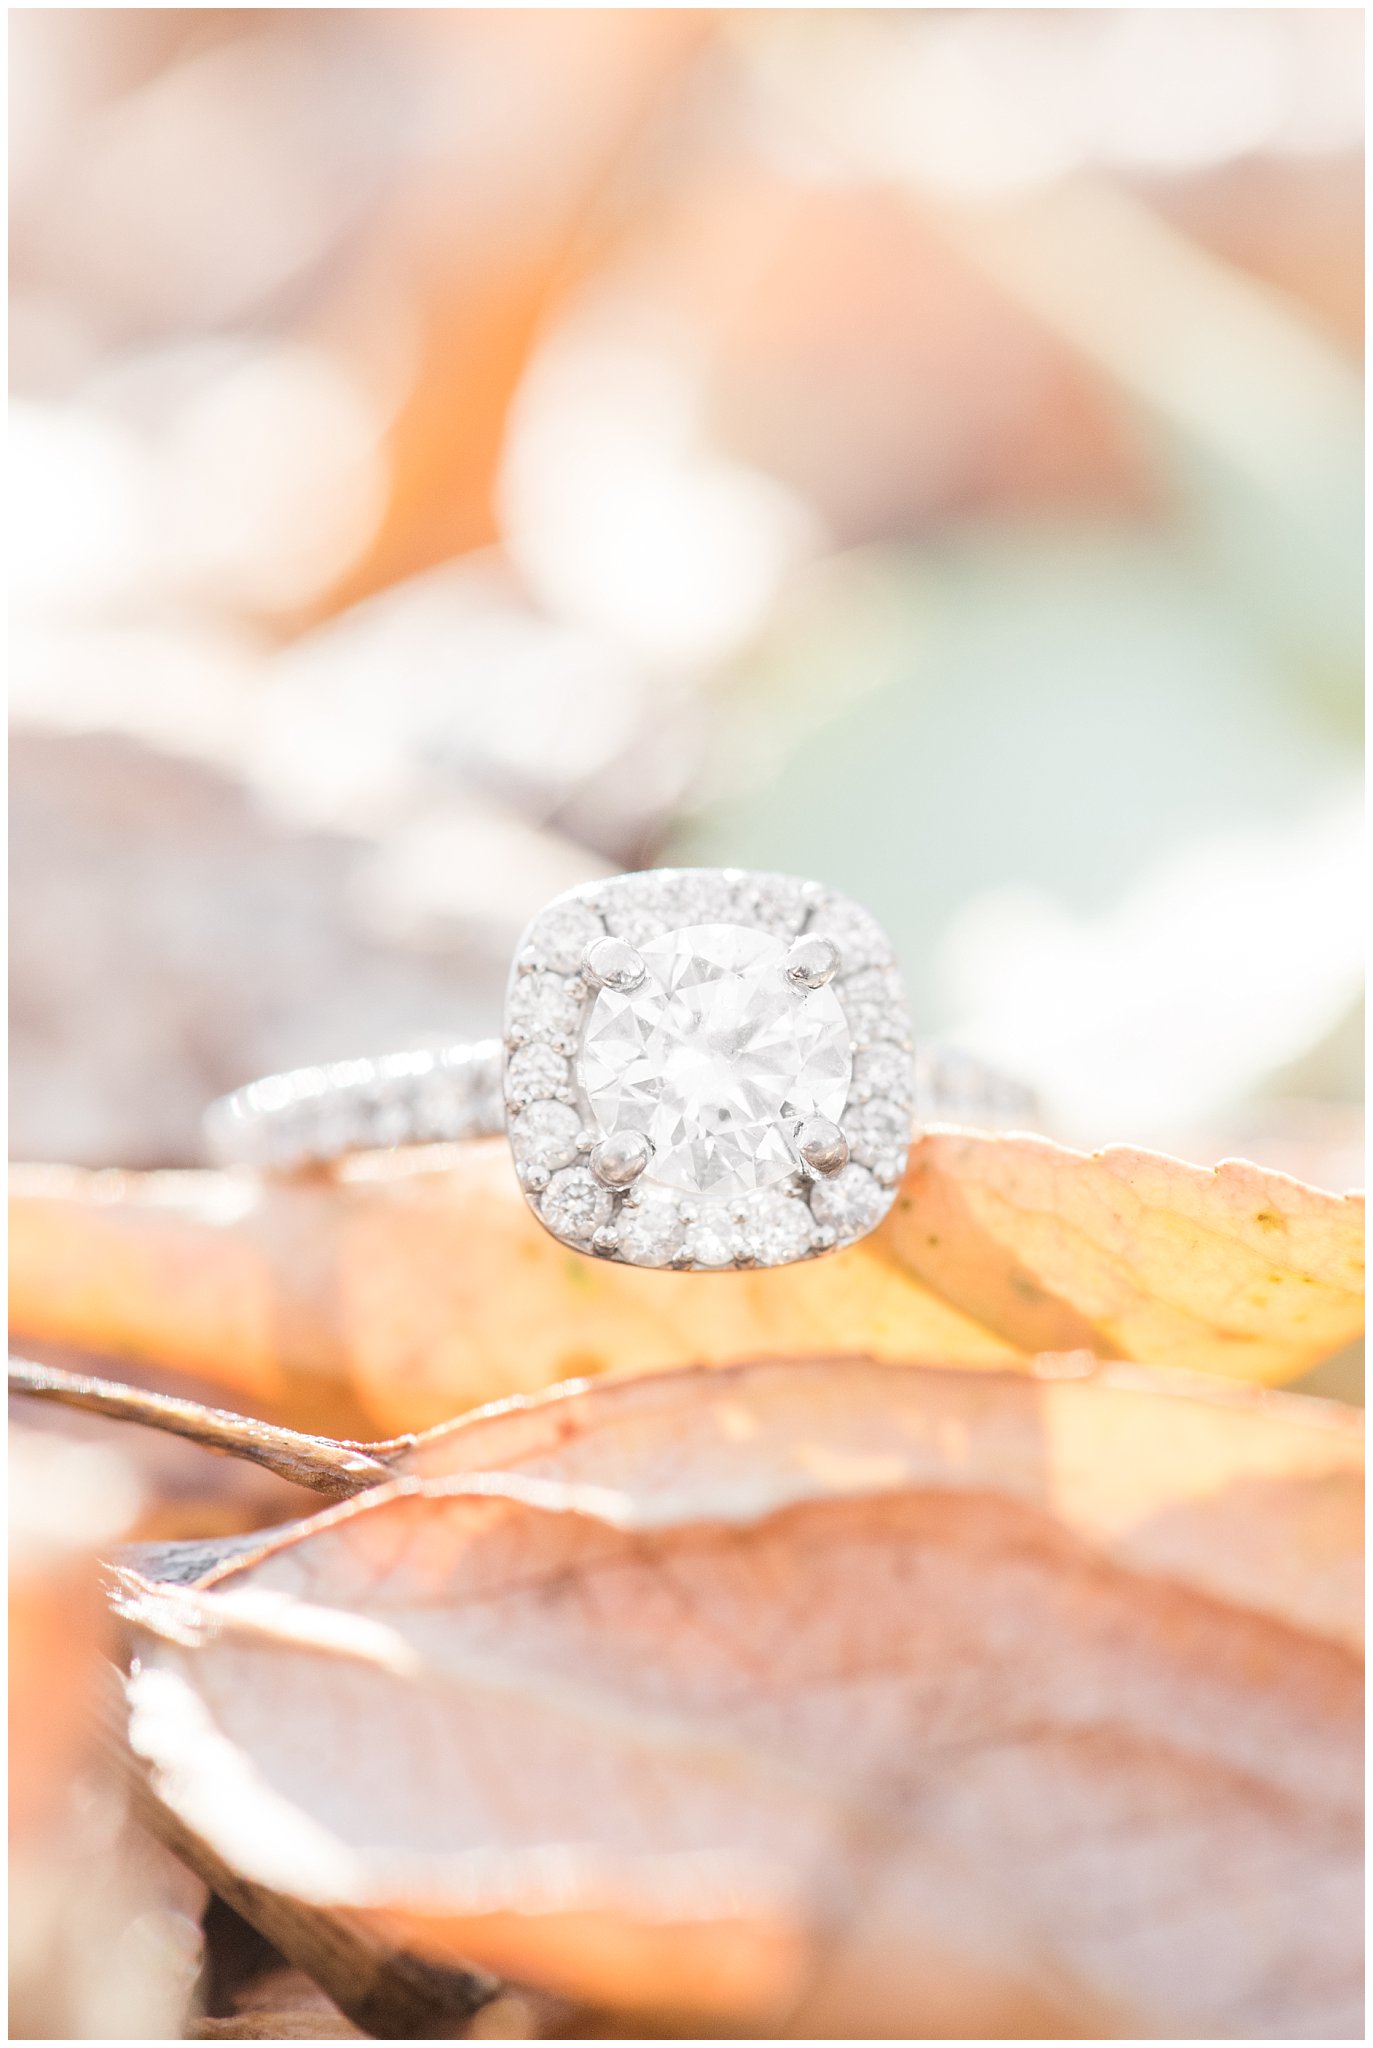 Engagement ring on fall leaves | A Classic Snowbasin Fall Engagement Session | Jessie and Dallin Photography